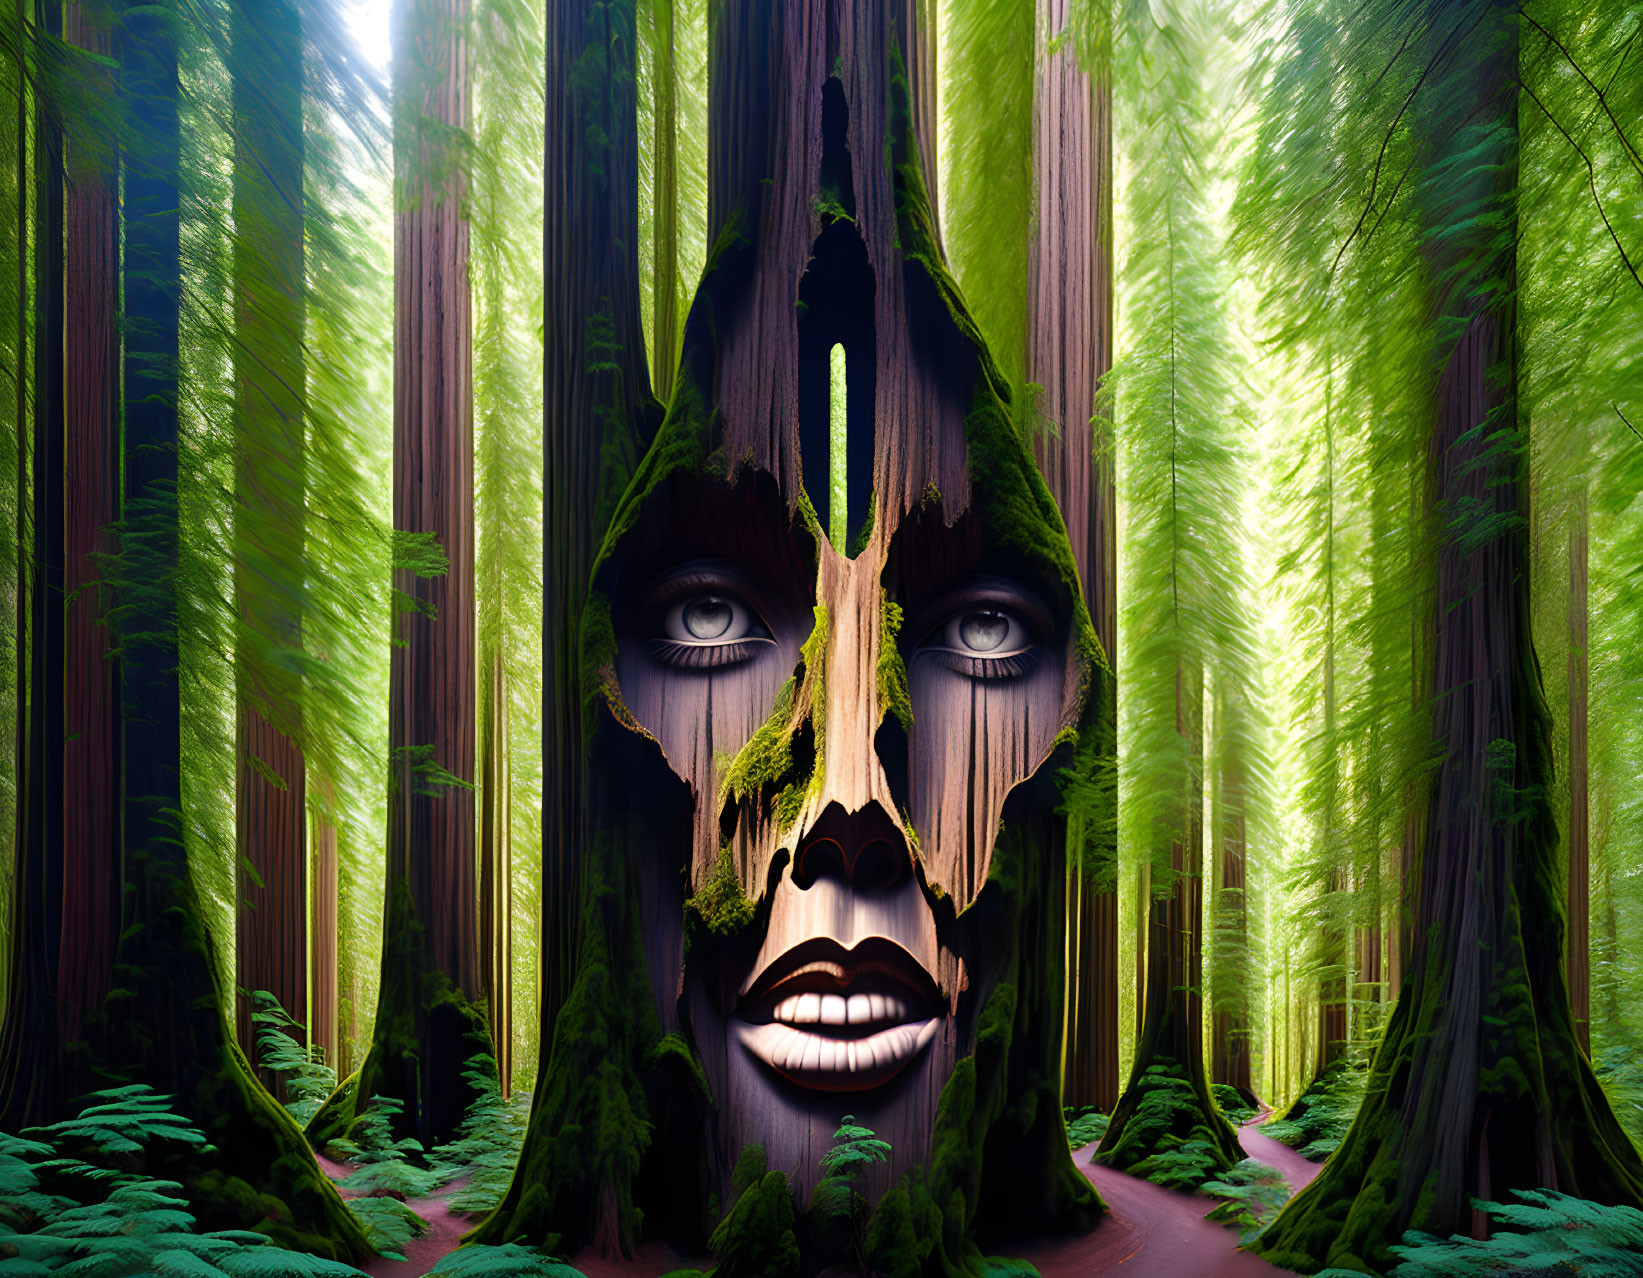 Surreal forest scene with giant masked face blending in, vibrant greenery.